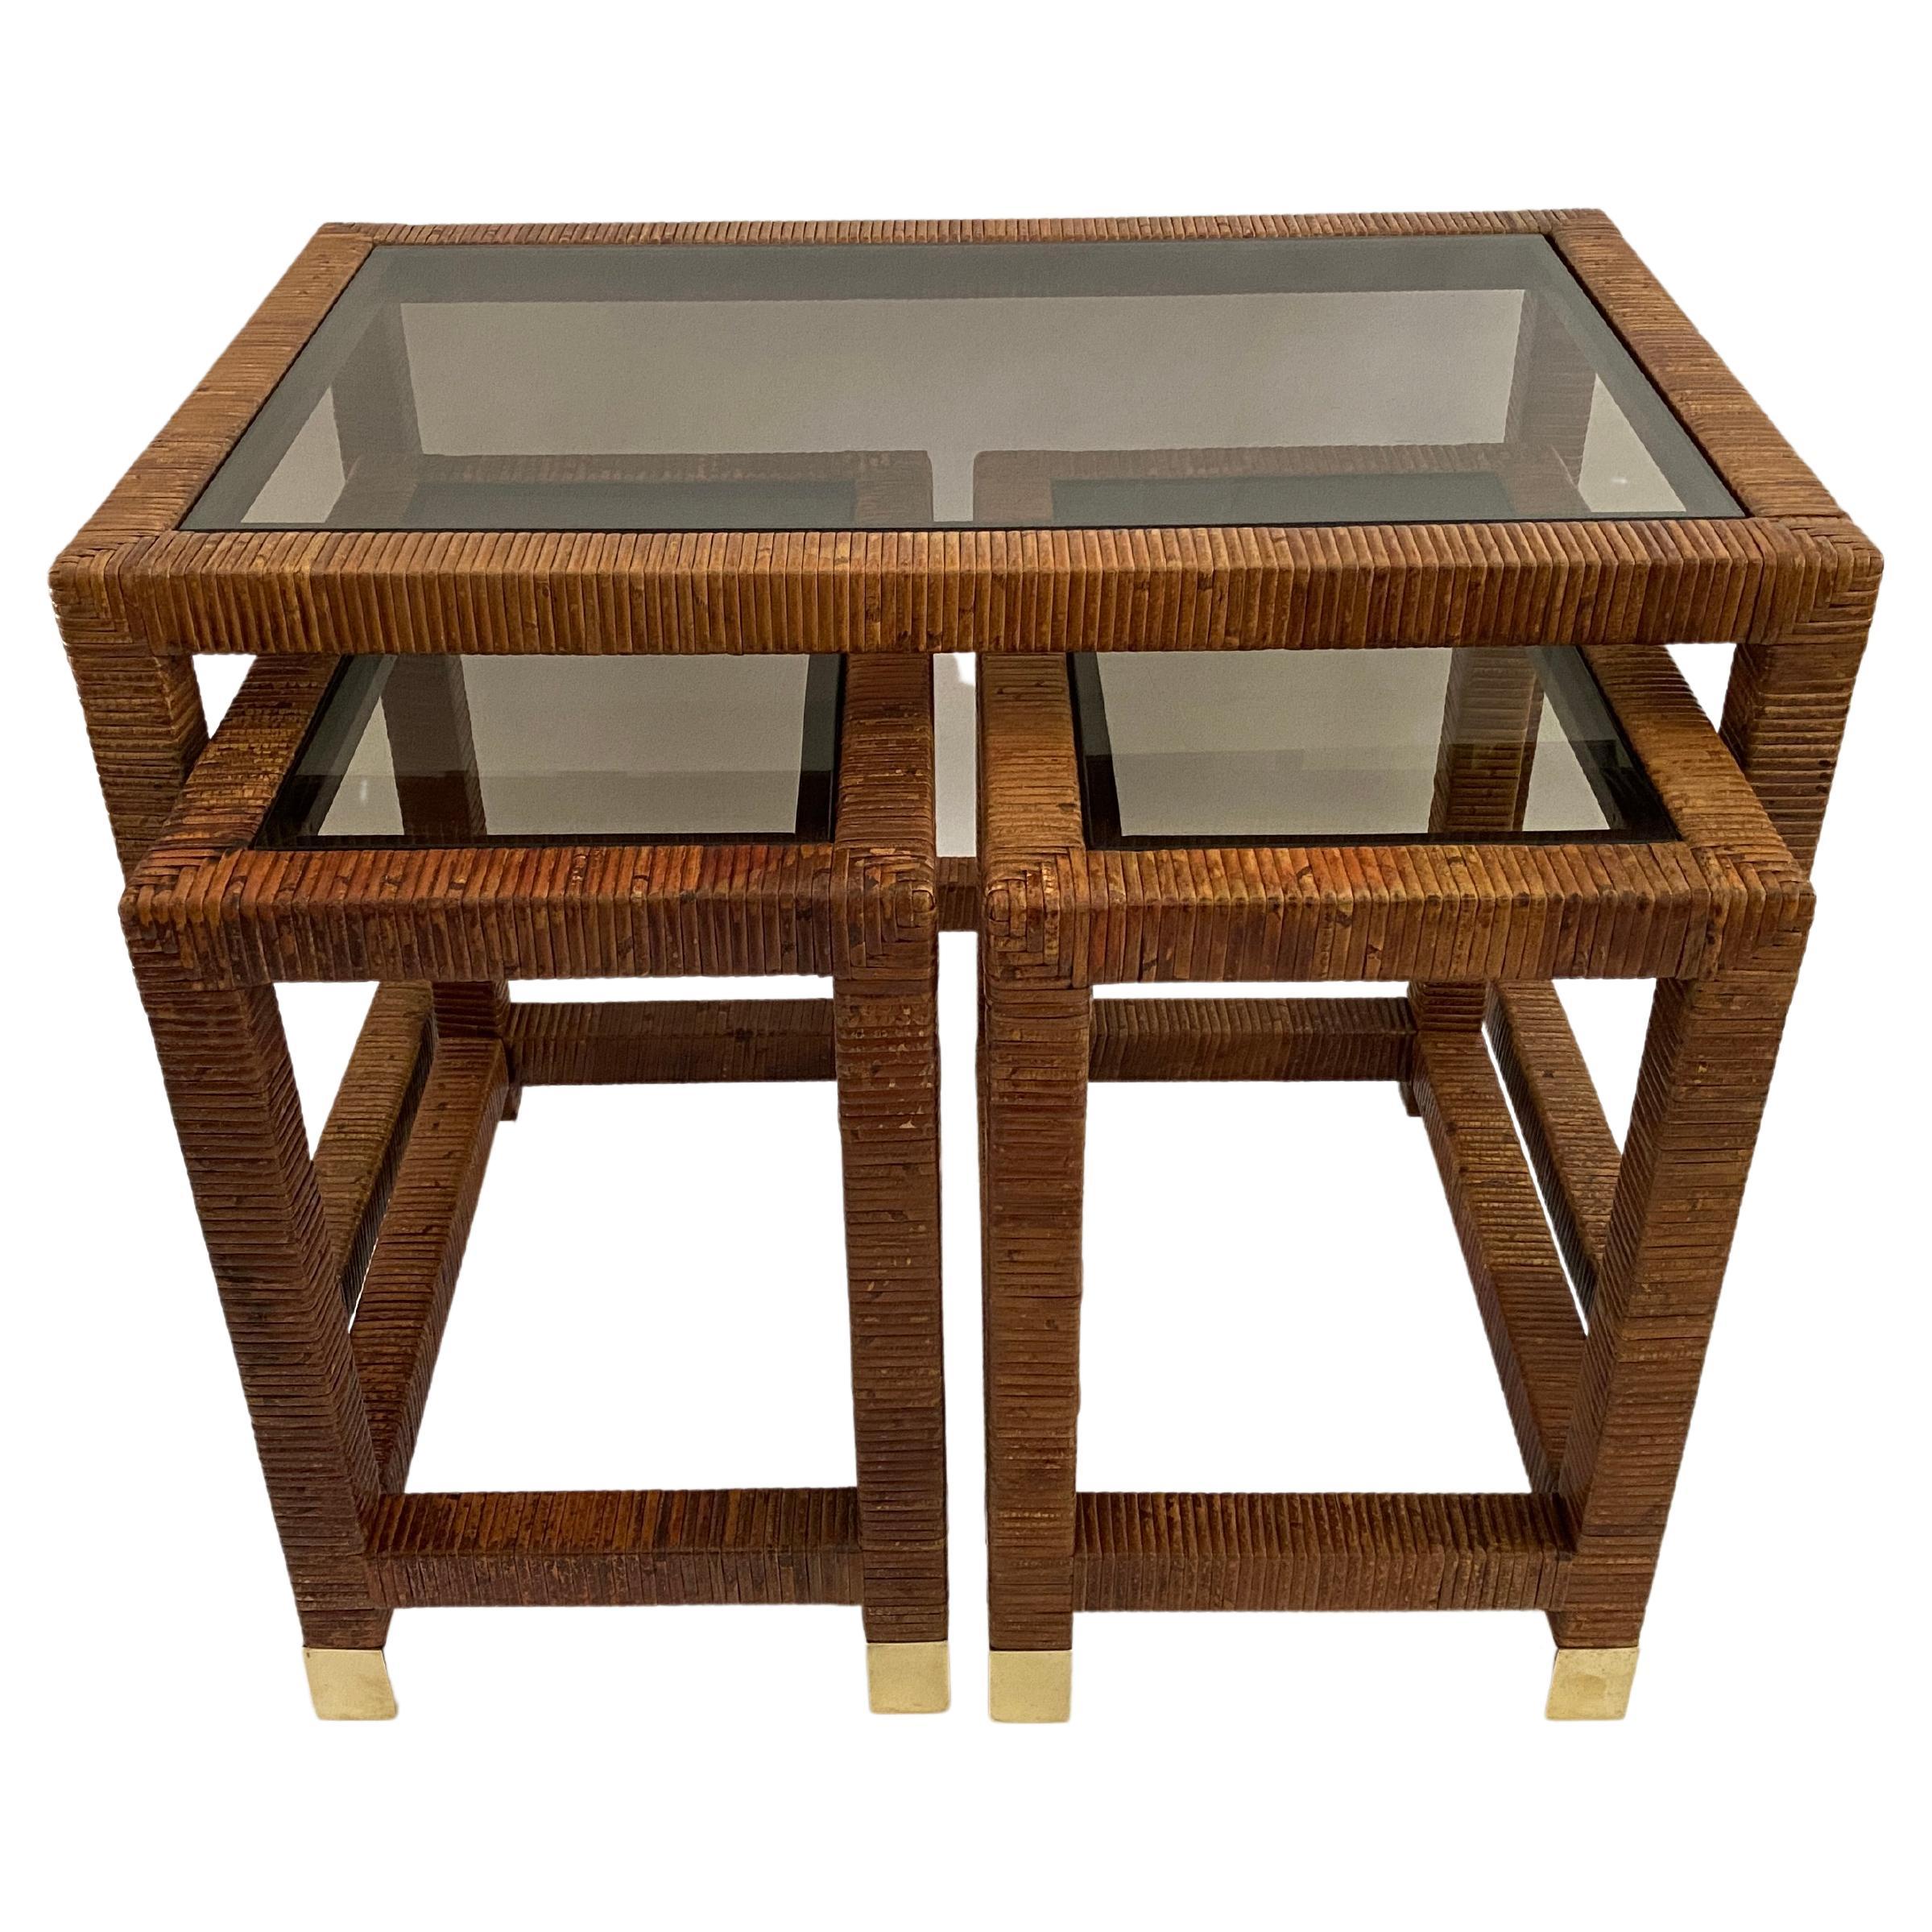 Vintage Cane / Smoked Glass Nesting Tables By Bielecky Brothers